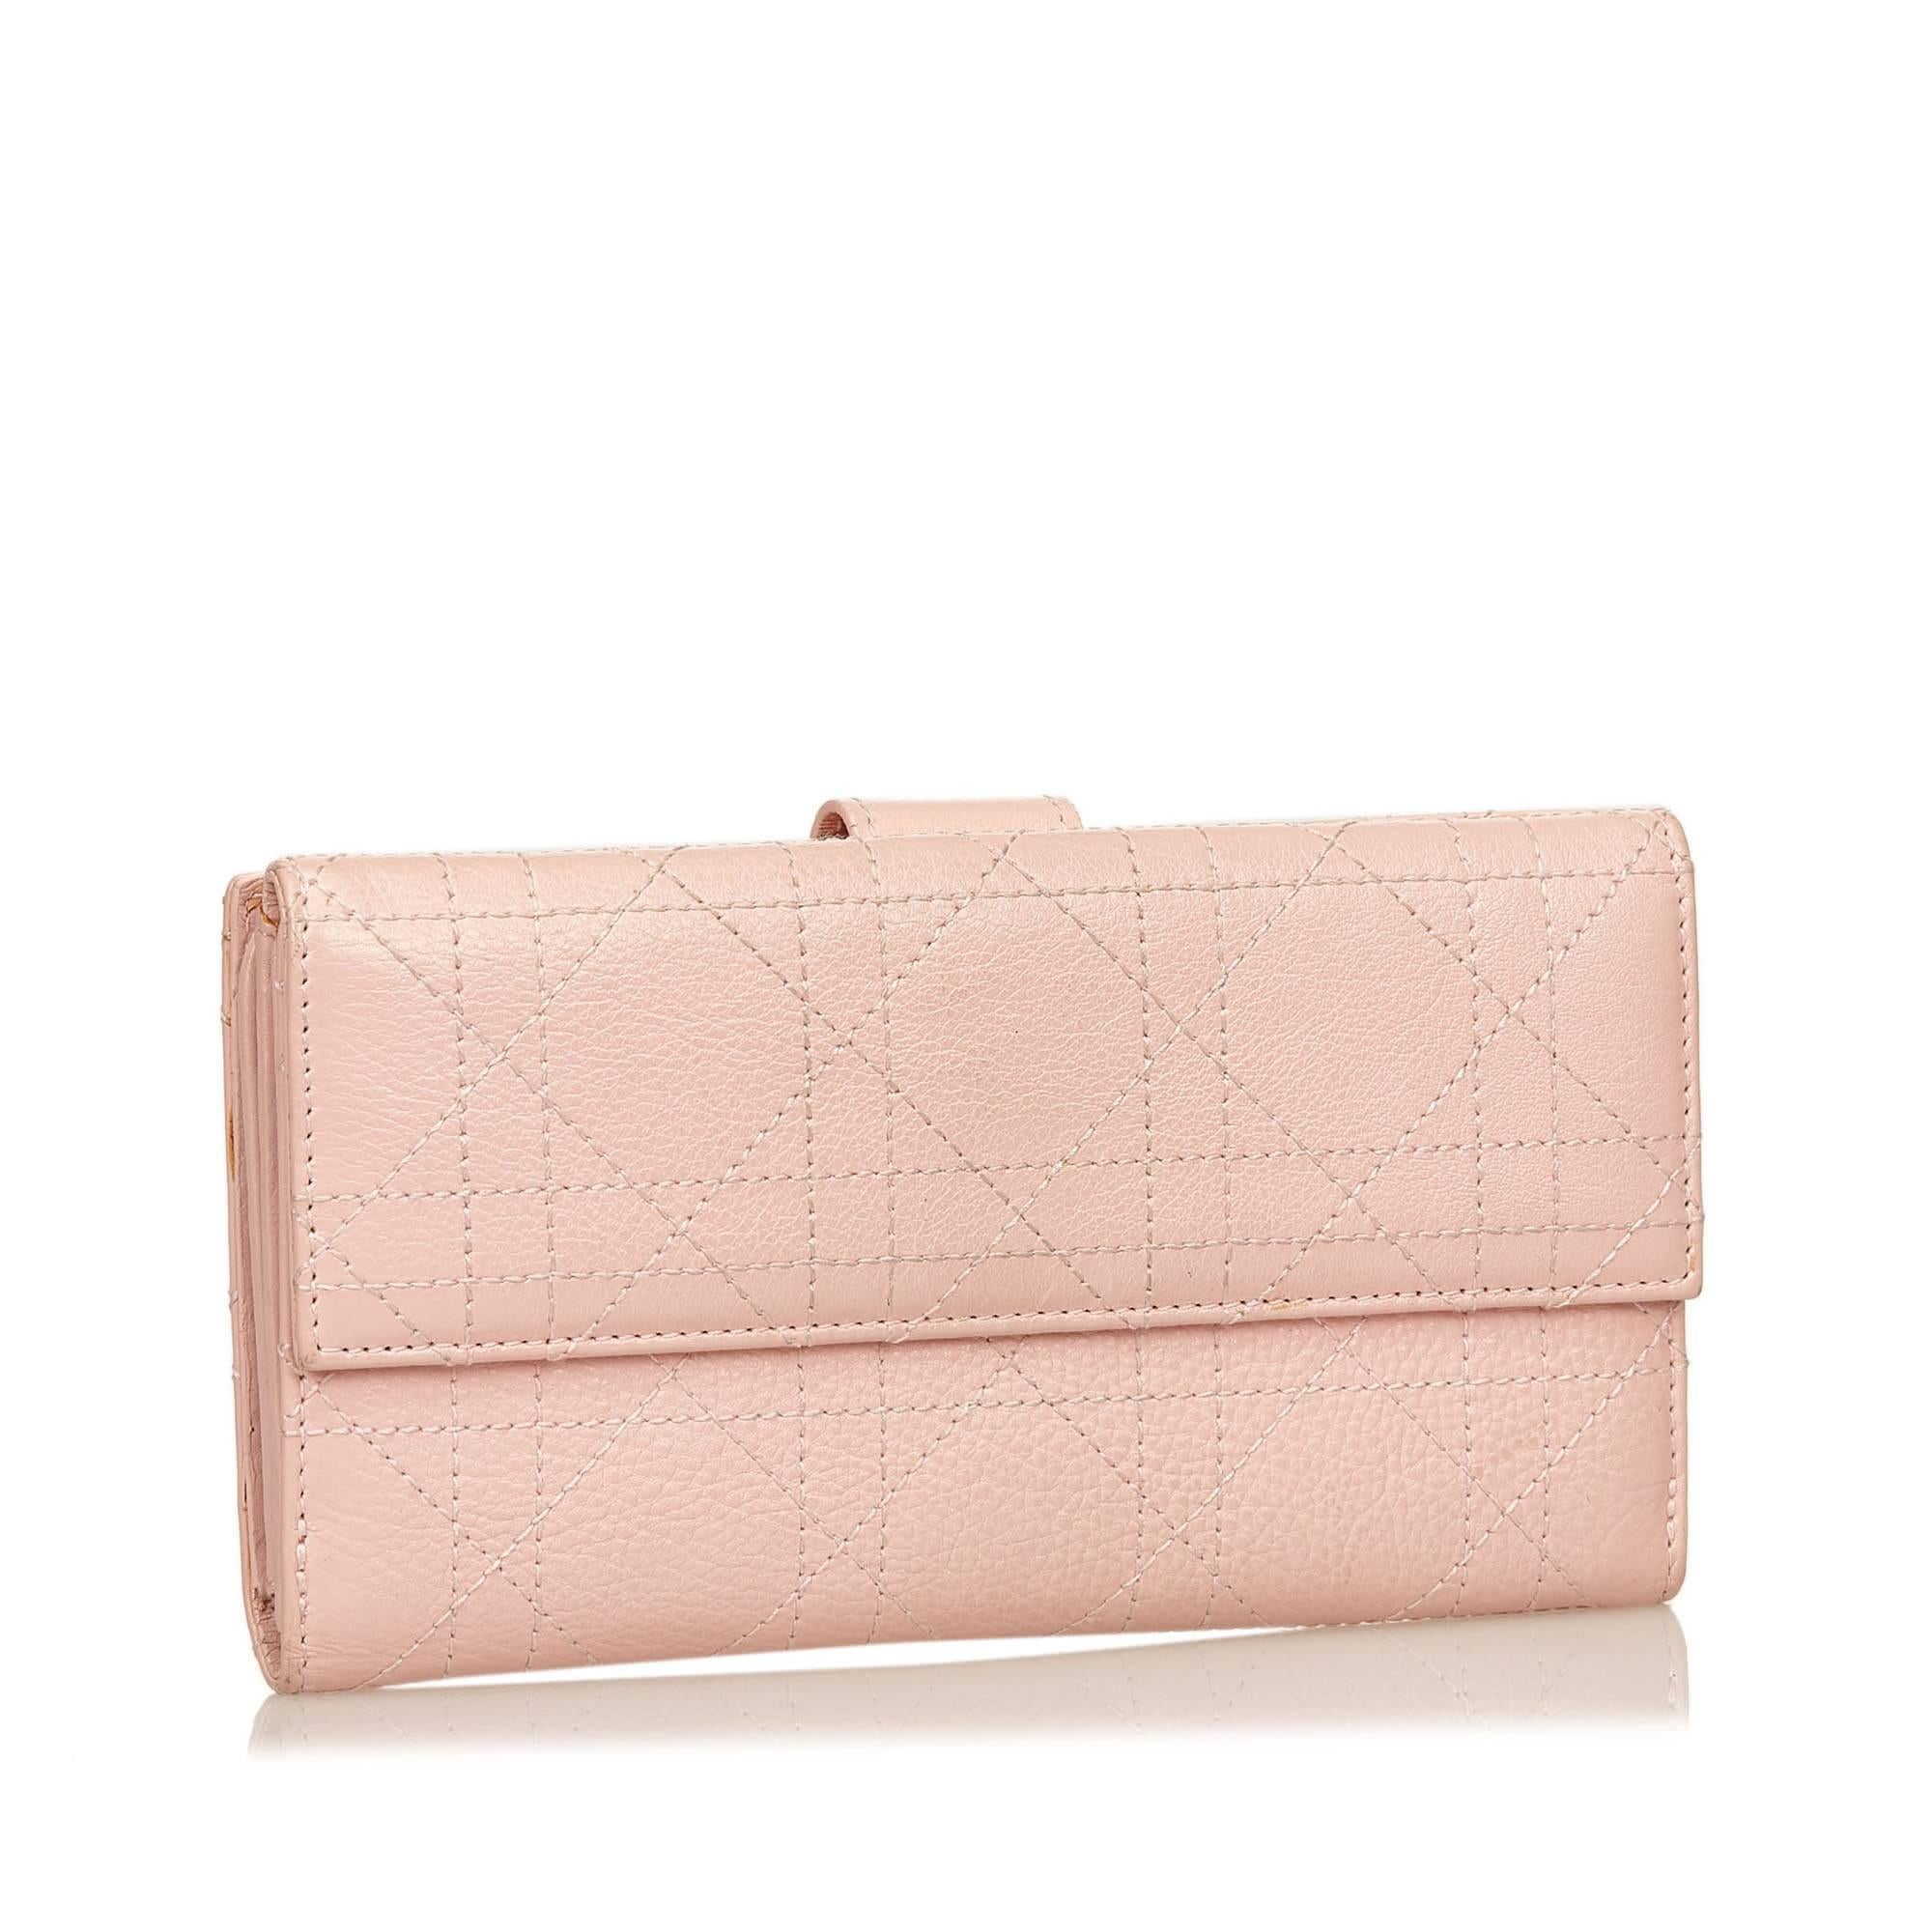 This CD wallet features a cannage leather body, an exterior strap compartment, a front flap with a magnetic closure, and interior slip pockets.

Color: Pink
